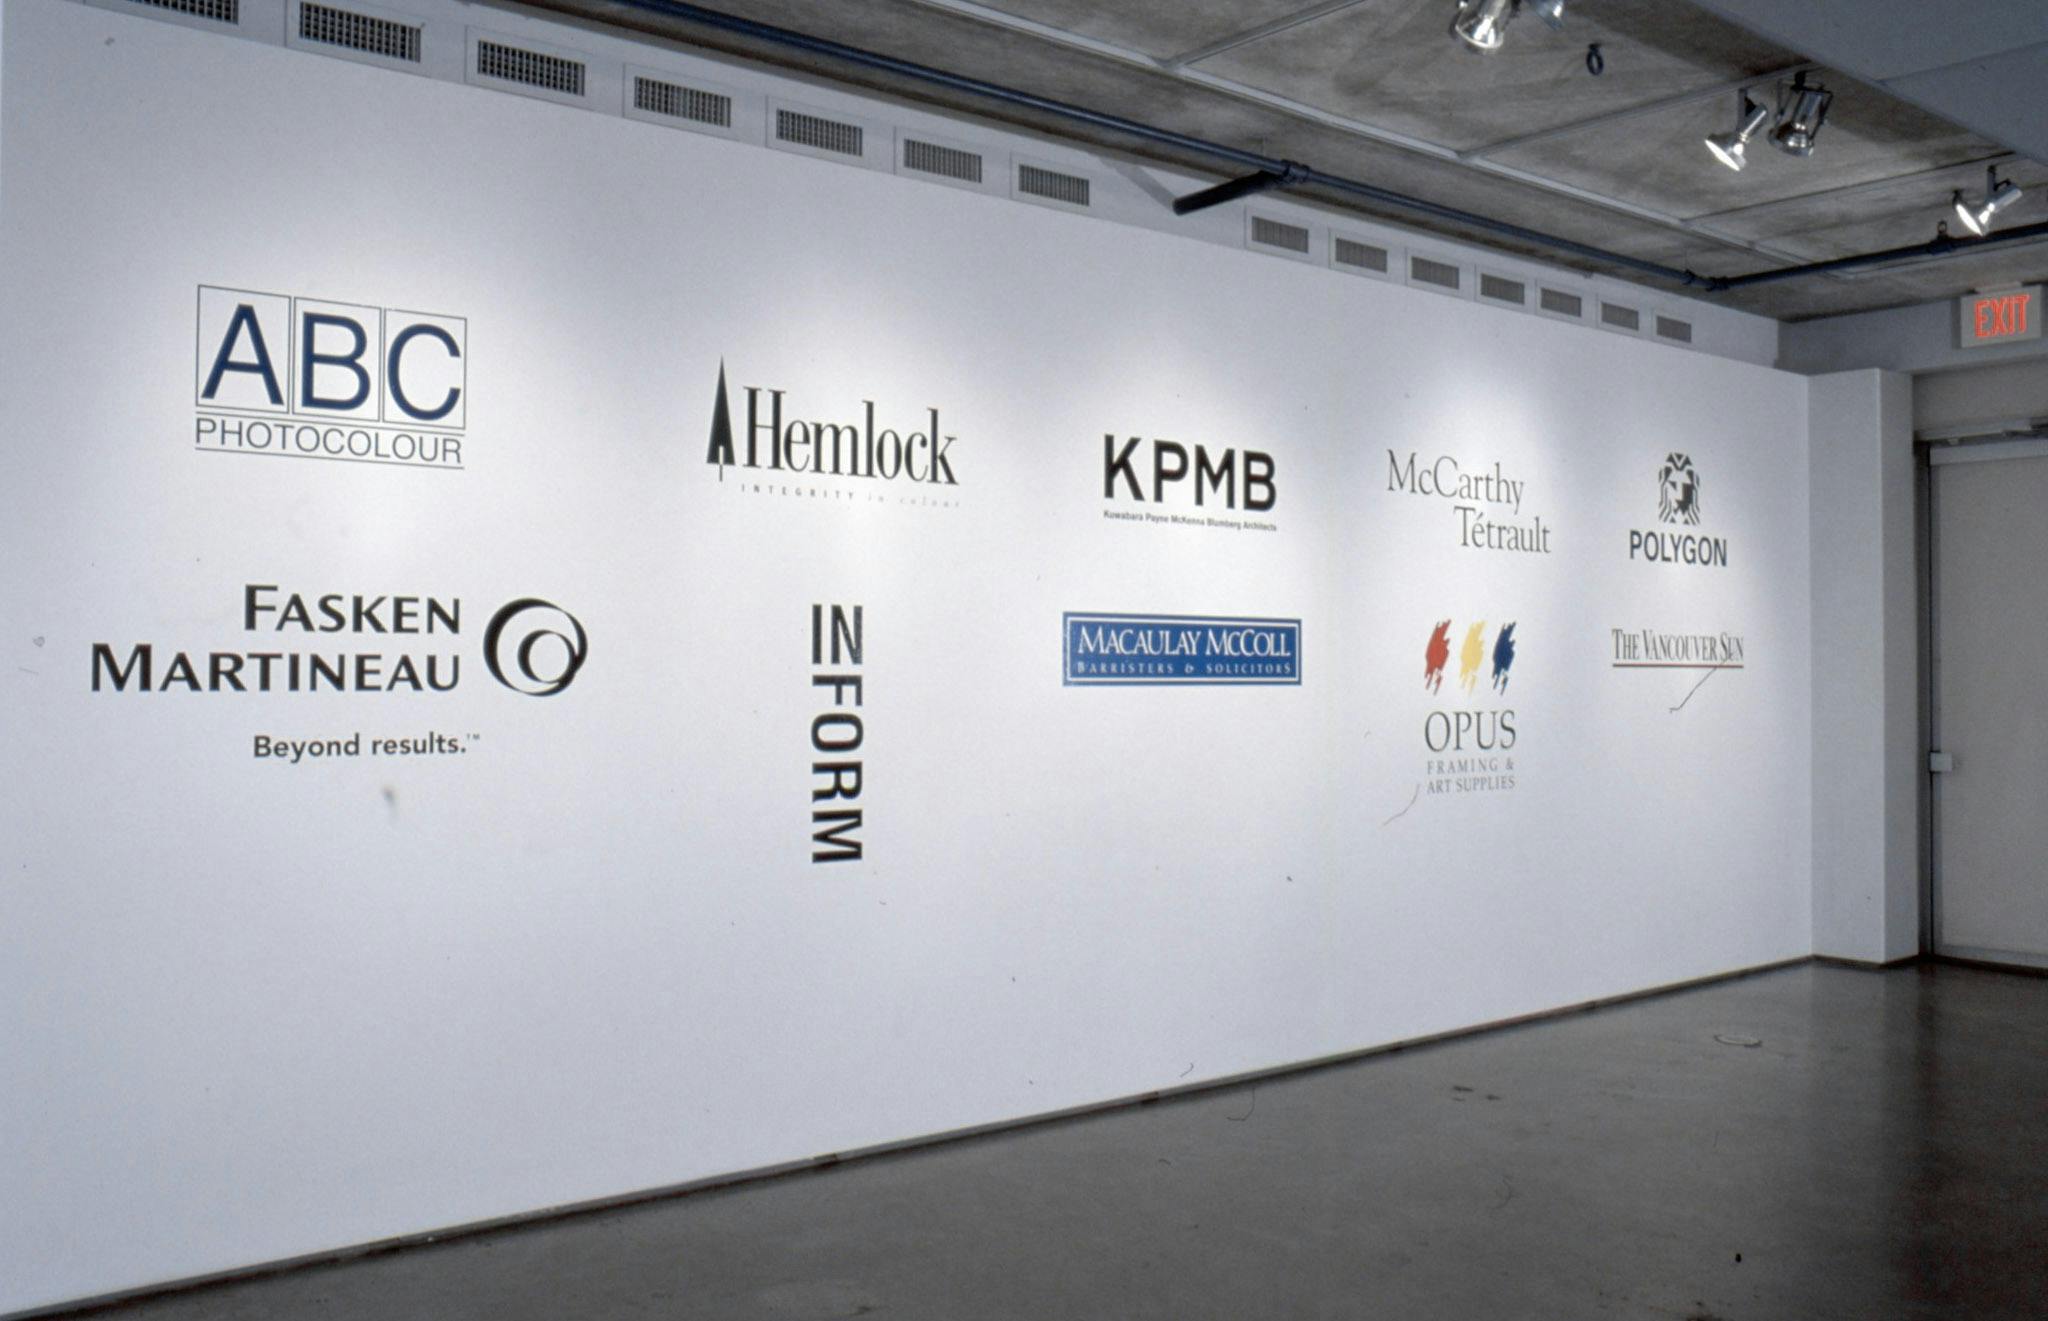 This is an installation shot of a gallery space. There are ten large logos of different companies and organisations printed on a gallery wall.